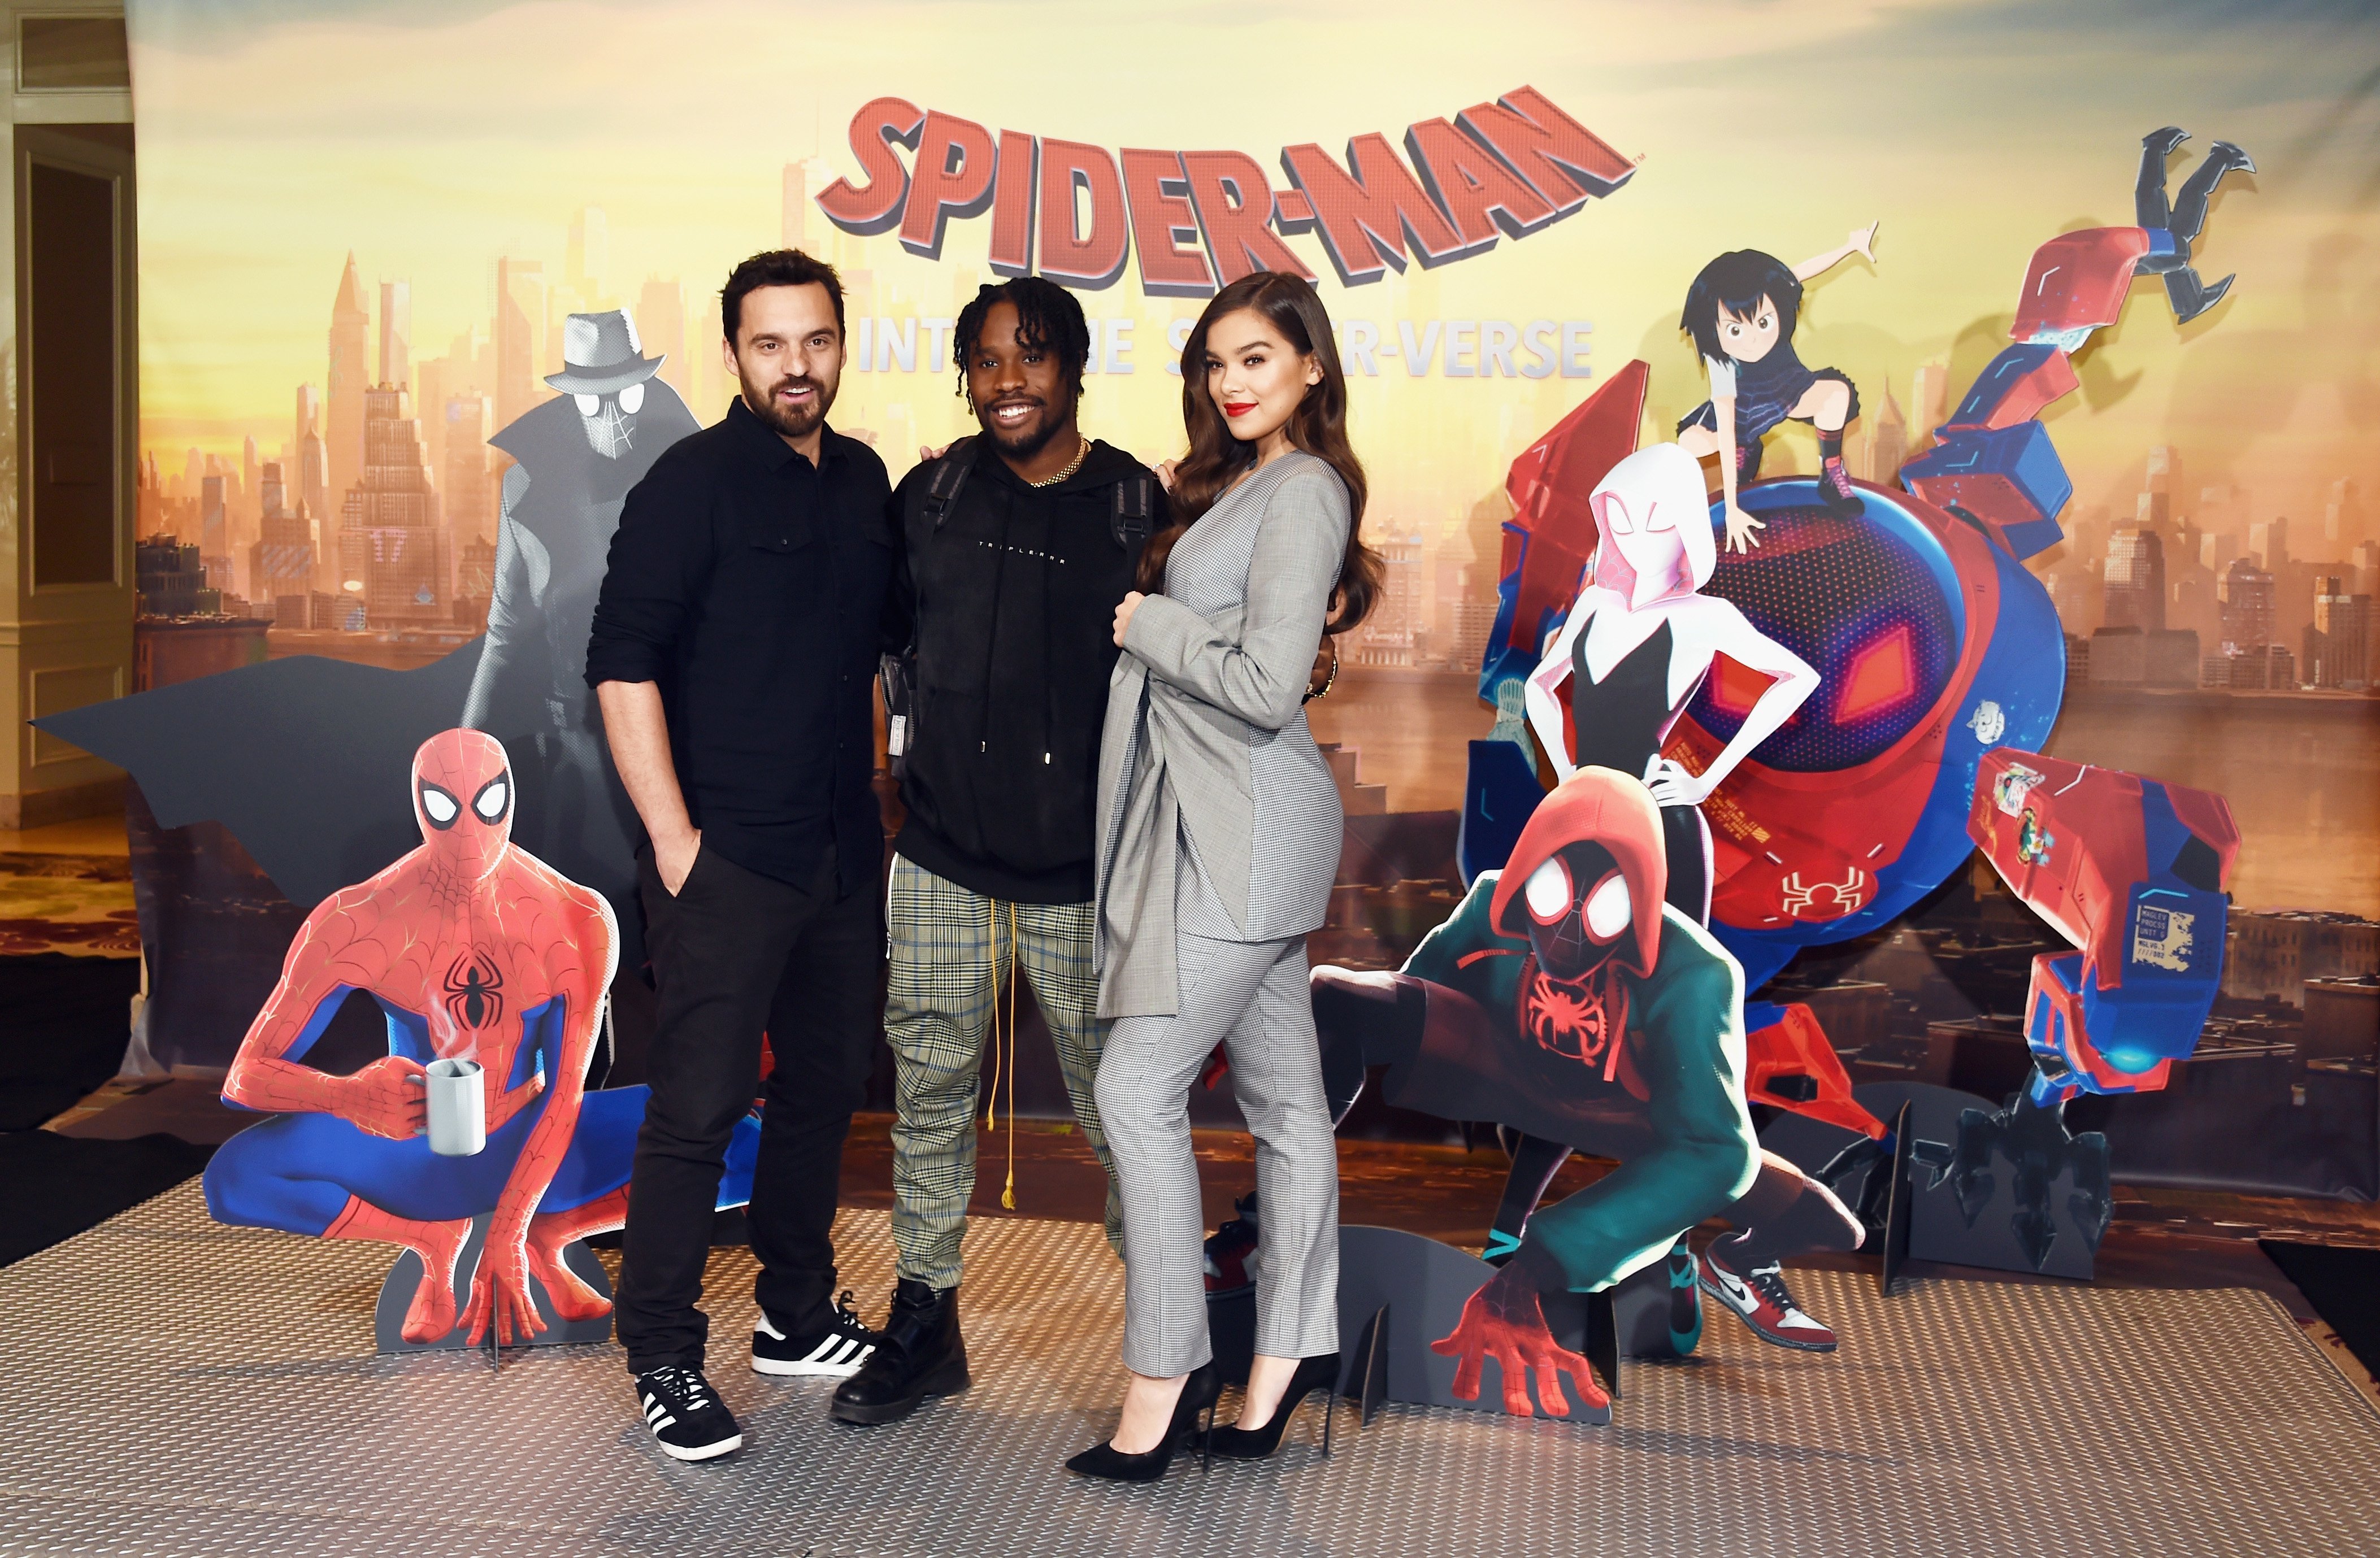 'Spider-Man: Into the Spider-Verse' stars Jake Johnson, Shameik Moore, and Hailee Steinfeld pose for pictures in front of a 3-D poster for the movie. Johnson wears a black button-up shirt and black pants. Moore wears a black hoodie and light green plaid pants. Steinfeld wears a gray suit.